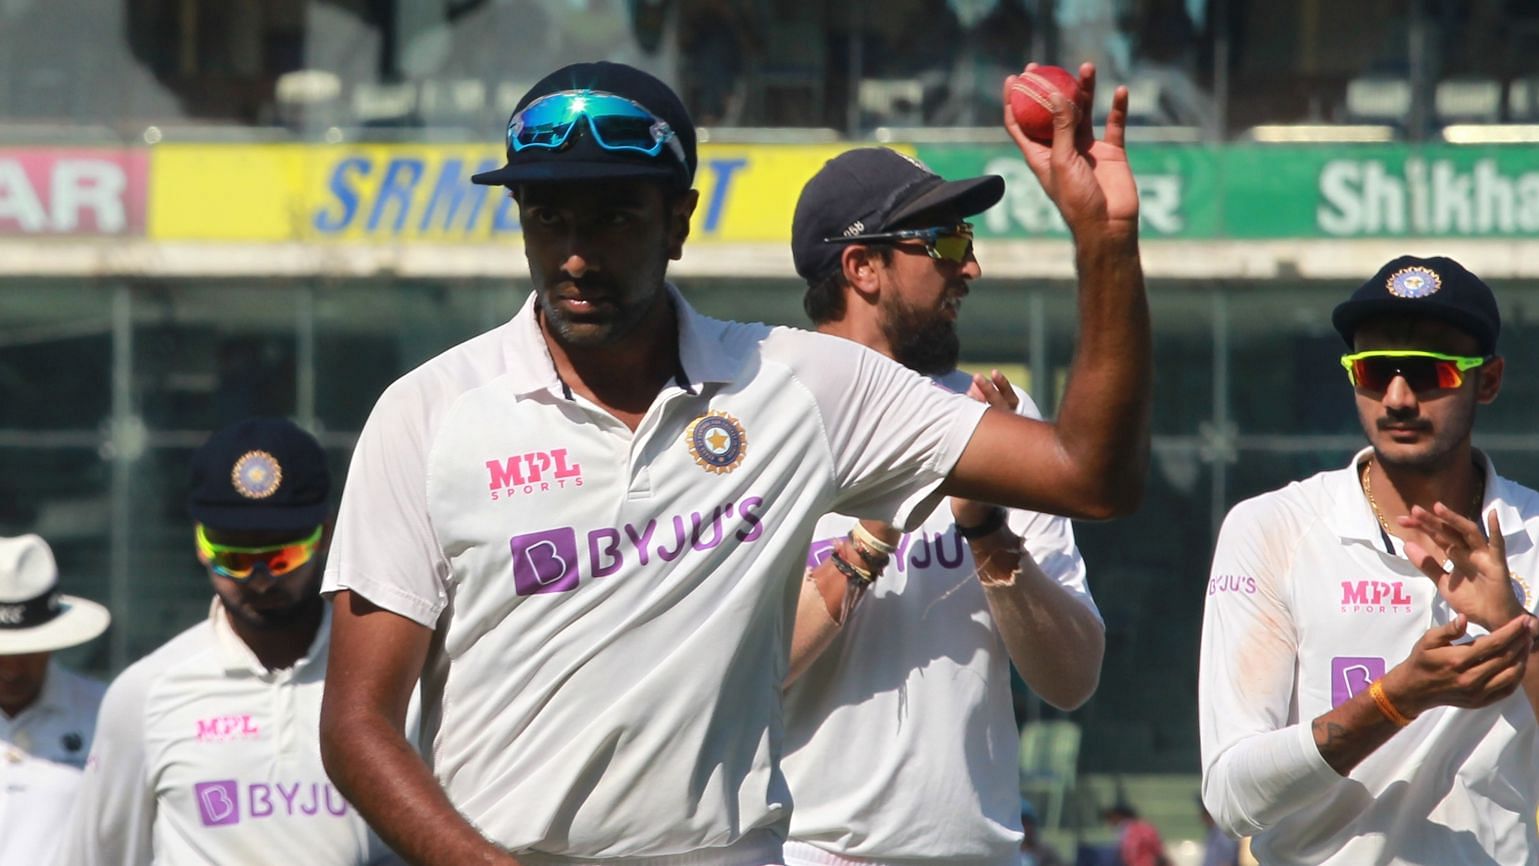 R Ashwin picked up 5 wickets for 63 runs on Day 2 of the Chennai Test.